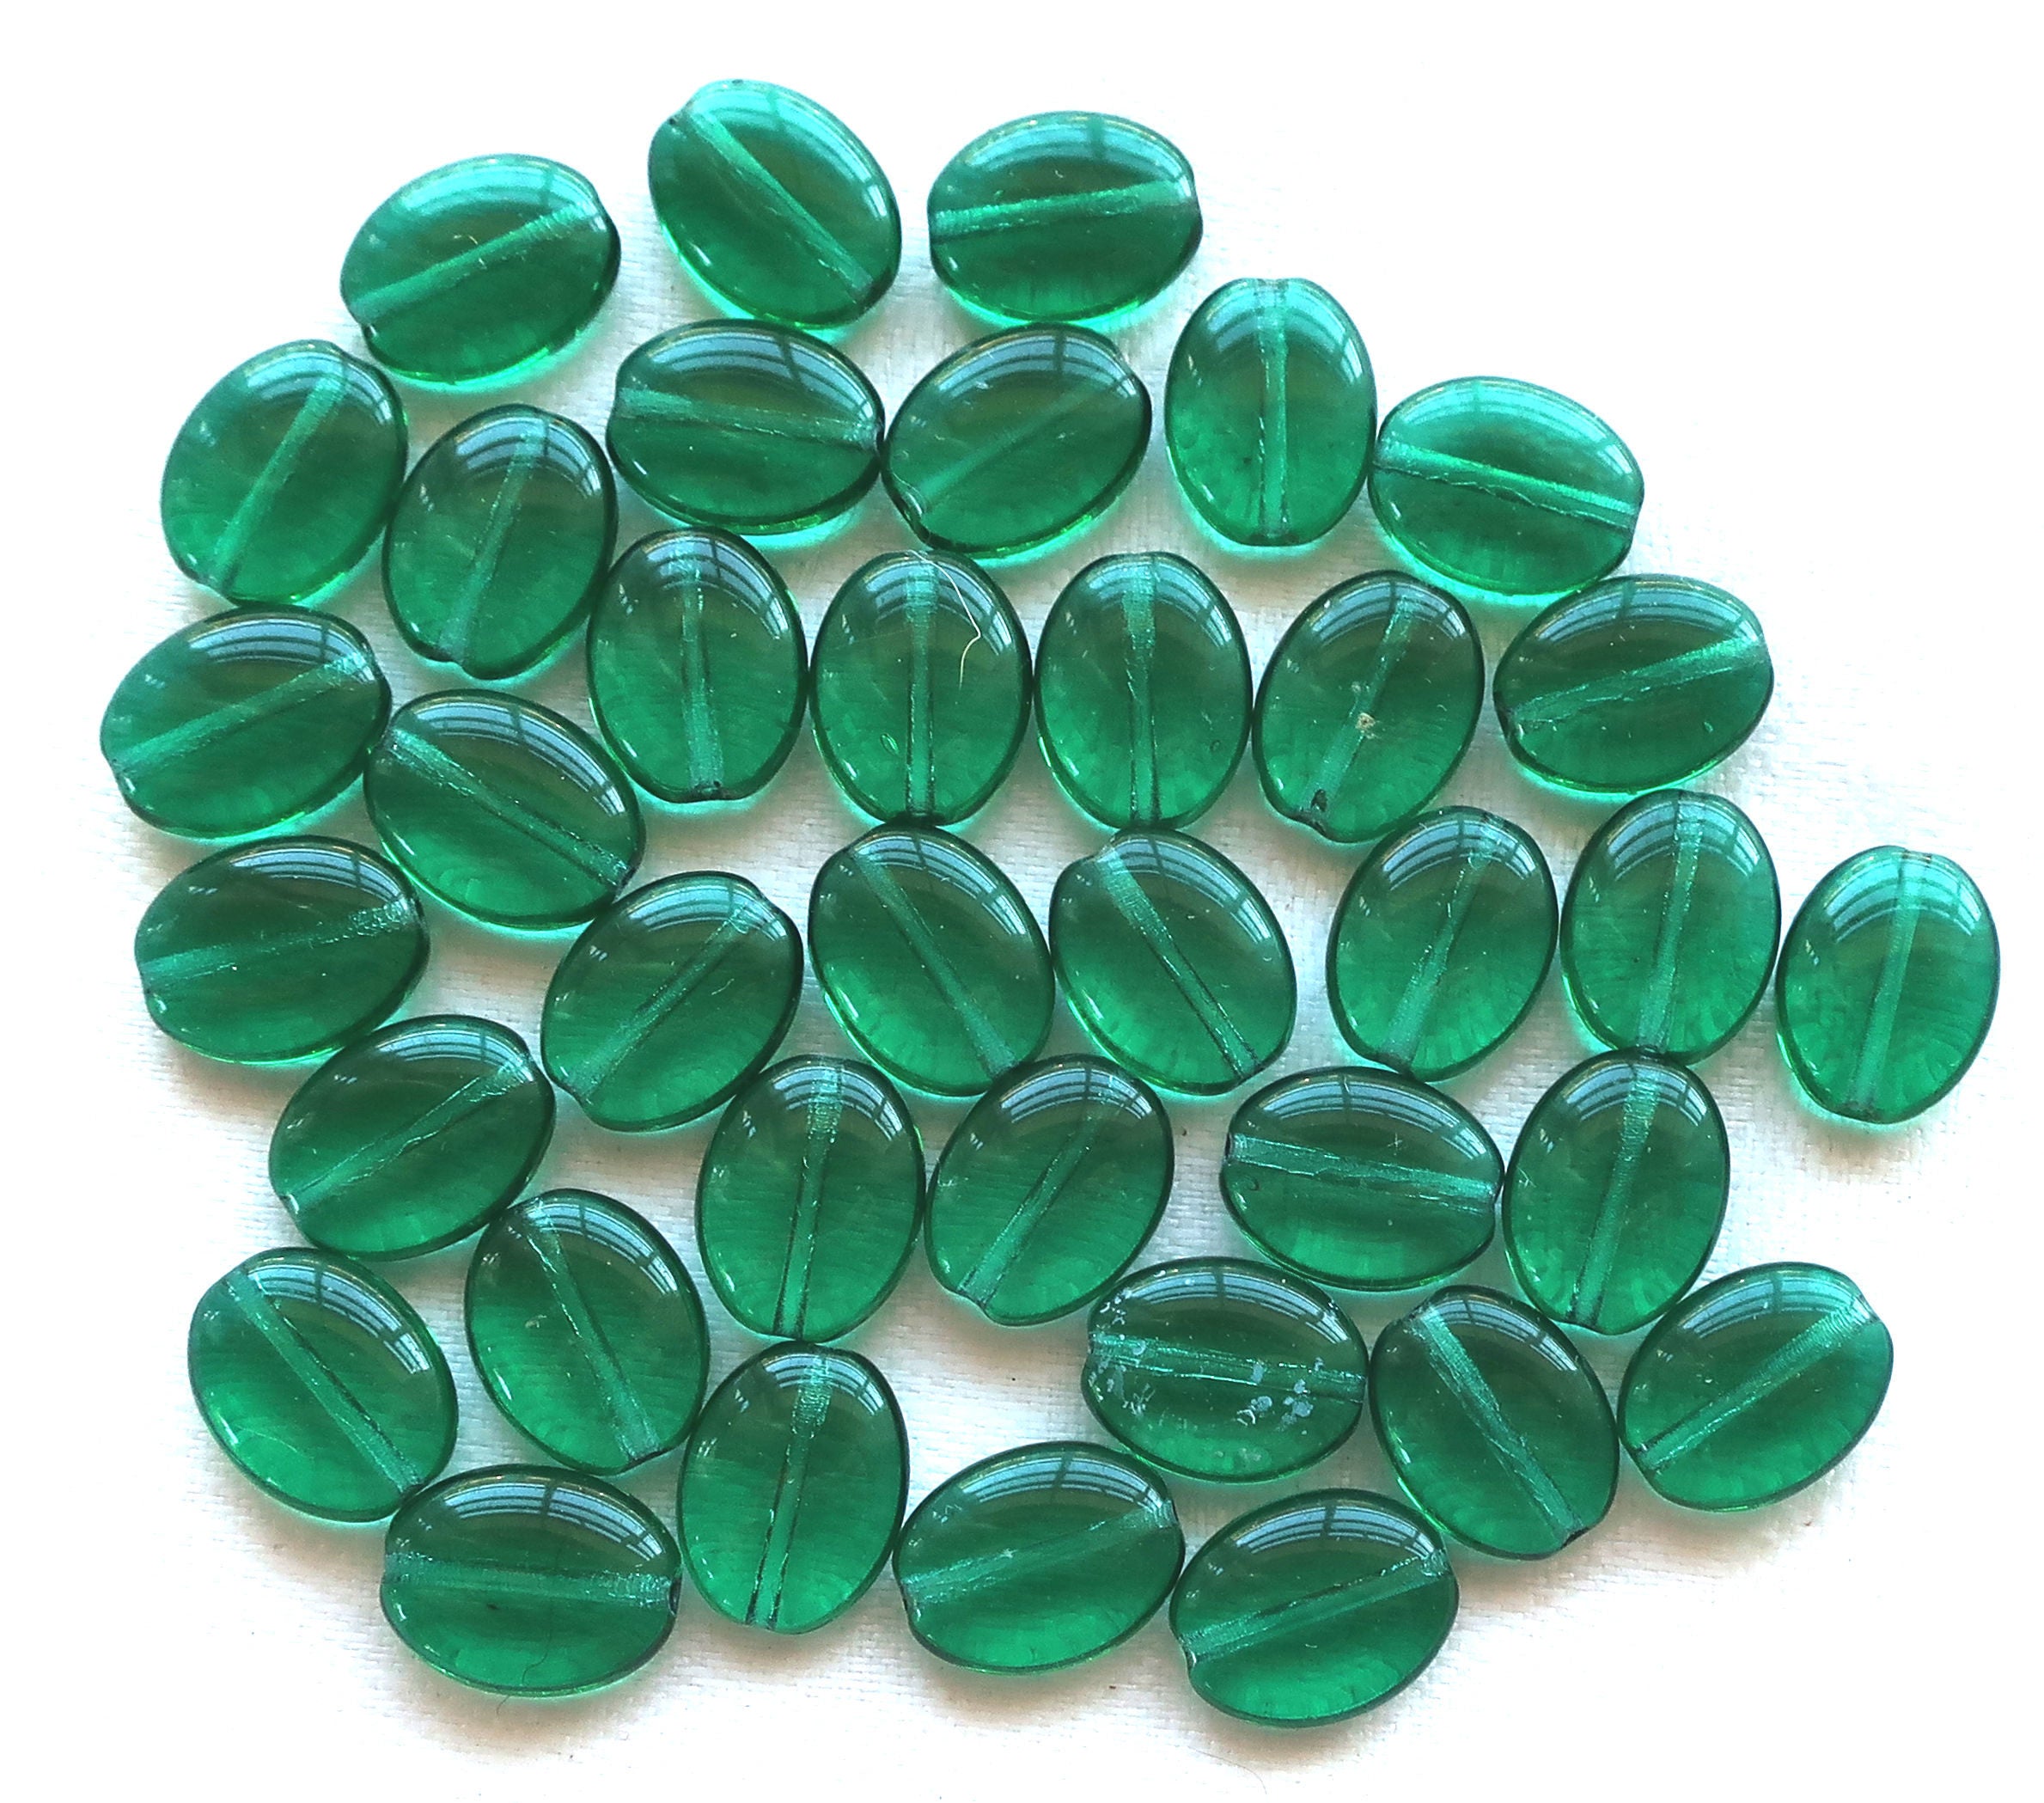 Foiled Crystal Glass Beads, Teal, 10mm Smooth Round - Golden Age Beads